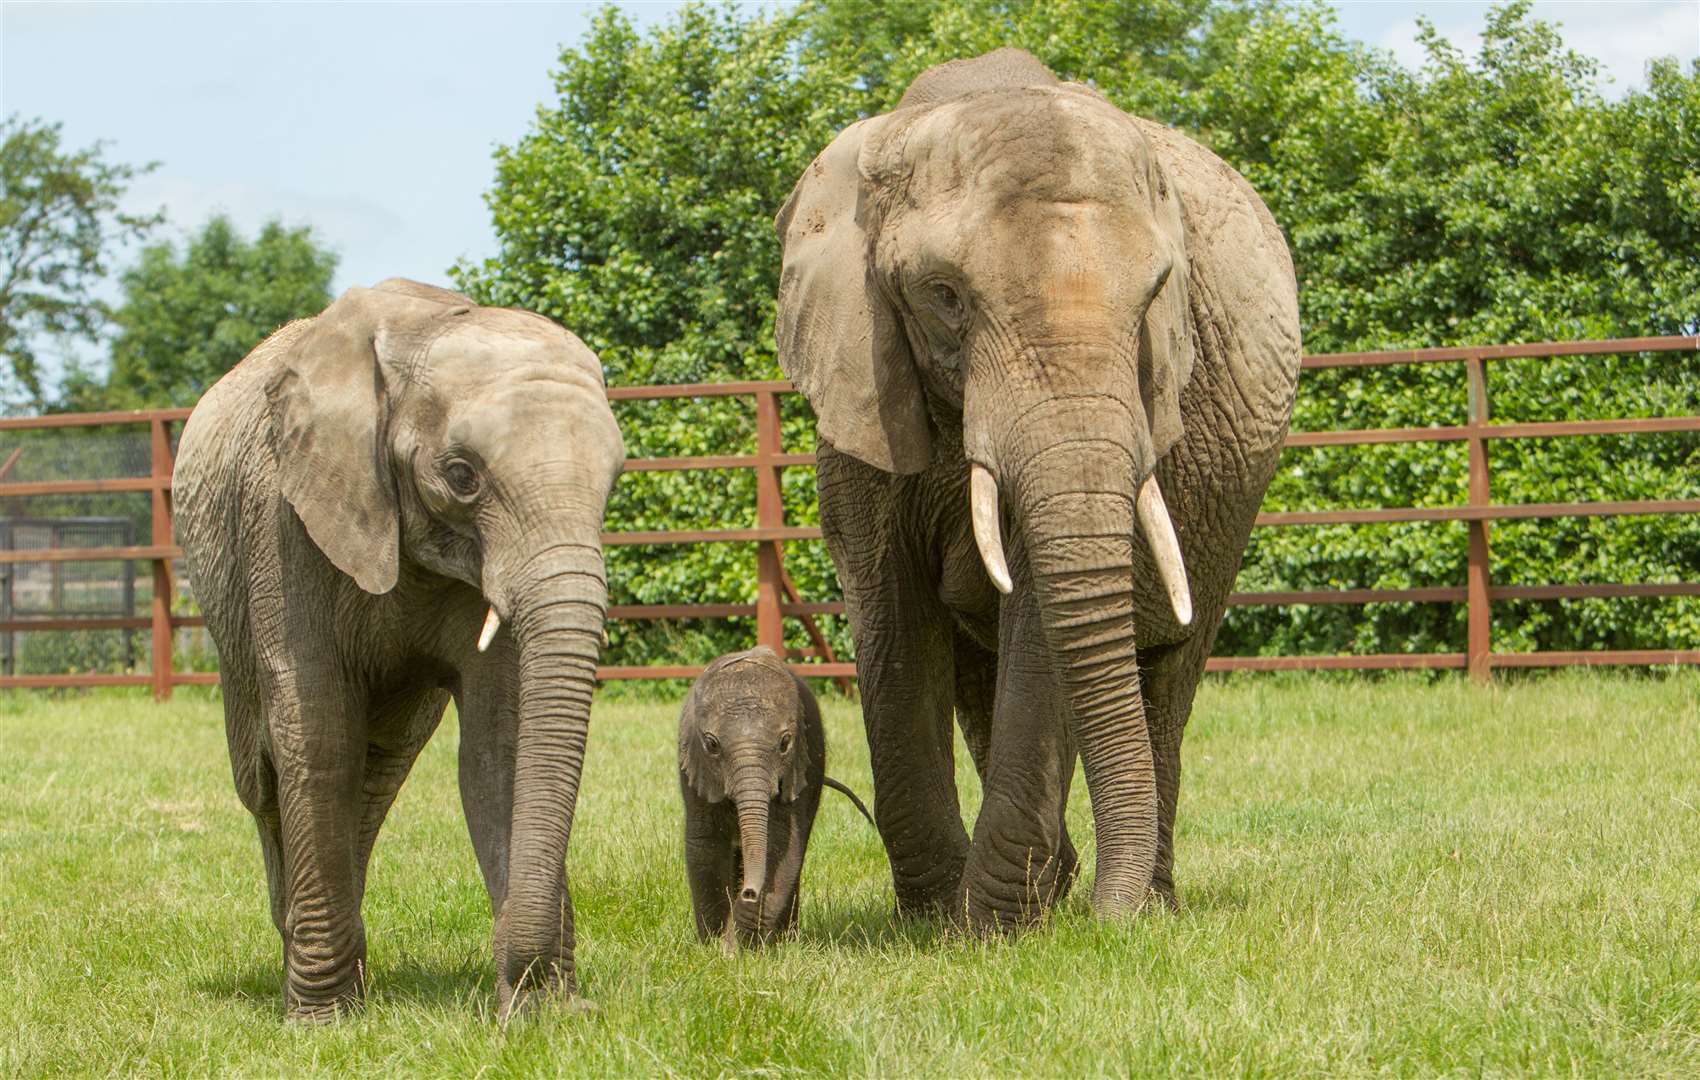 Explore the 90-acre wildlife park at Howletts with the Mums Go Free offer. Picture: Aspinall Foundation